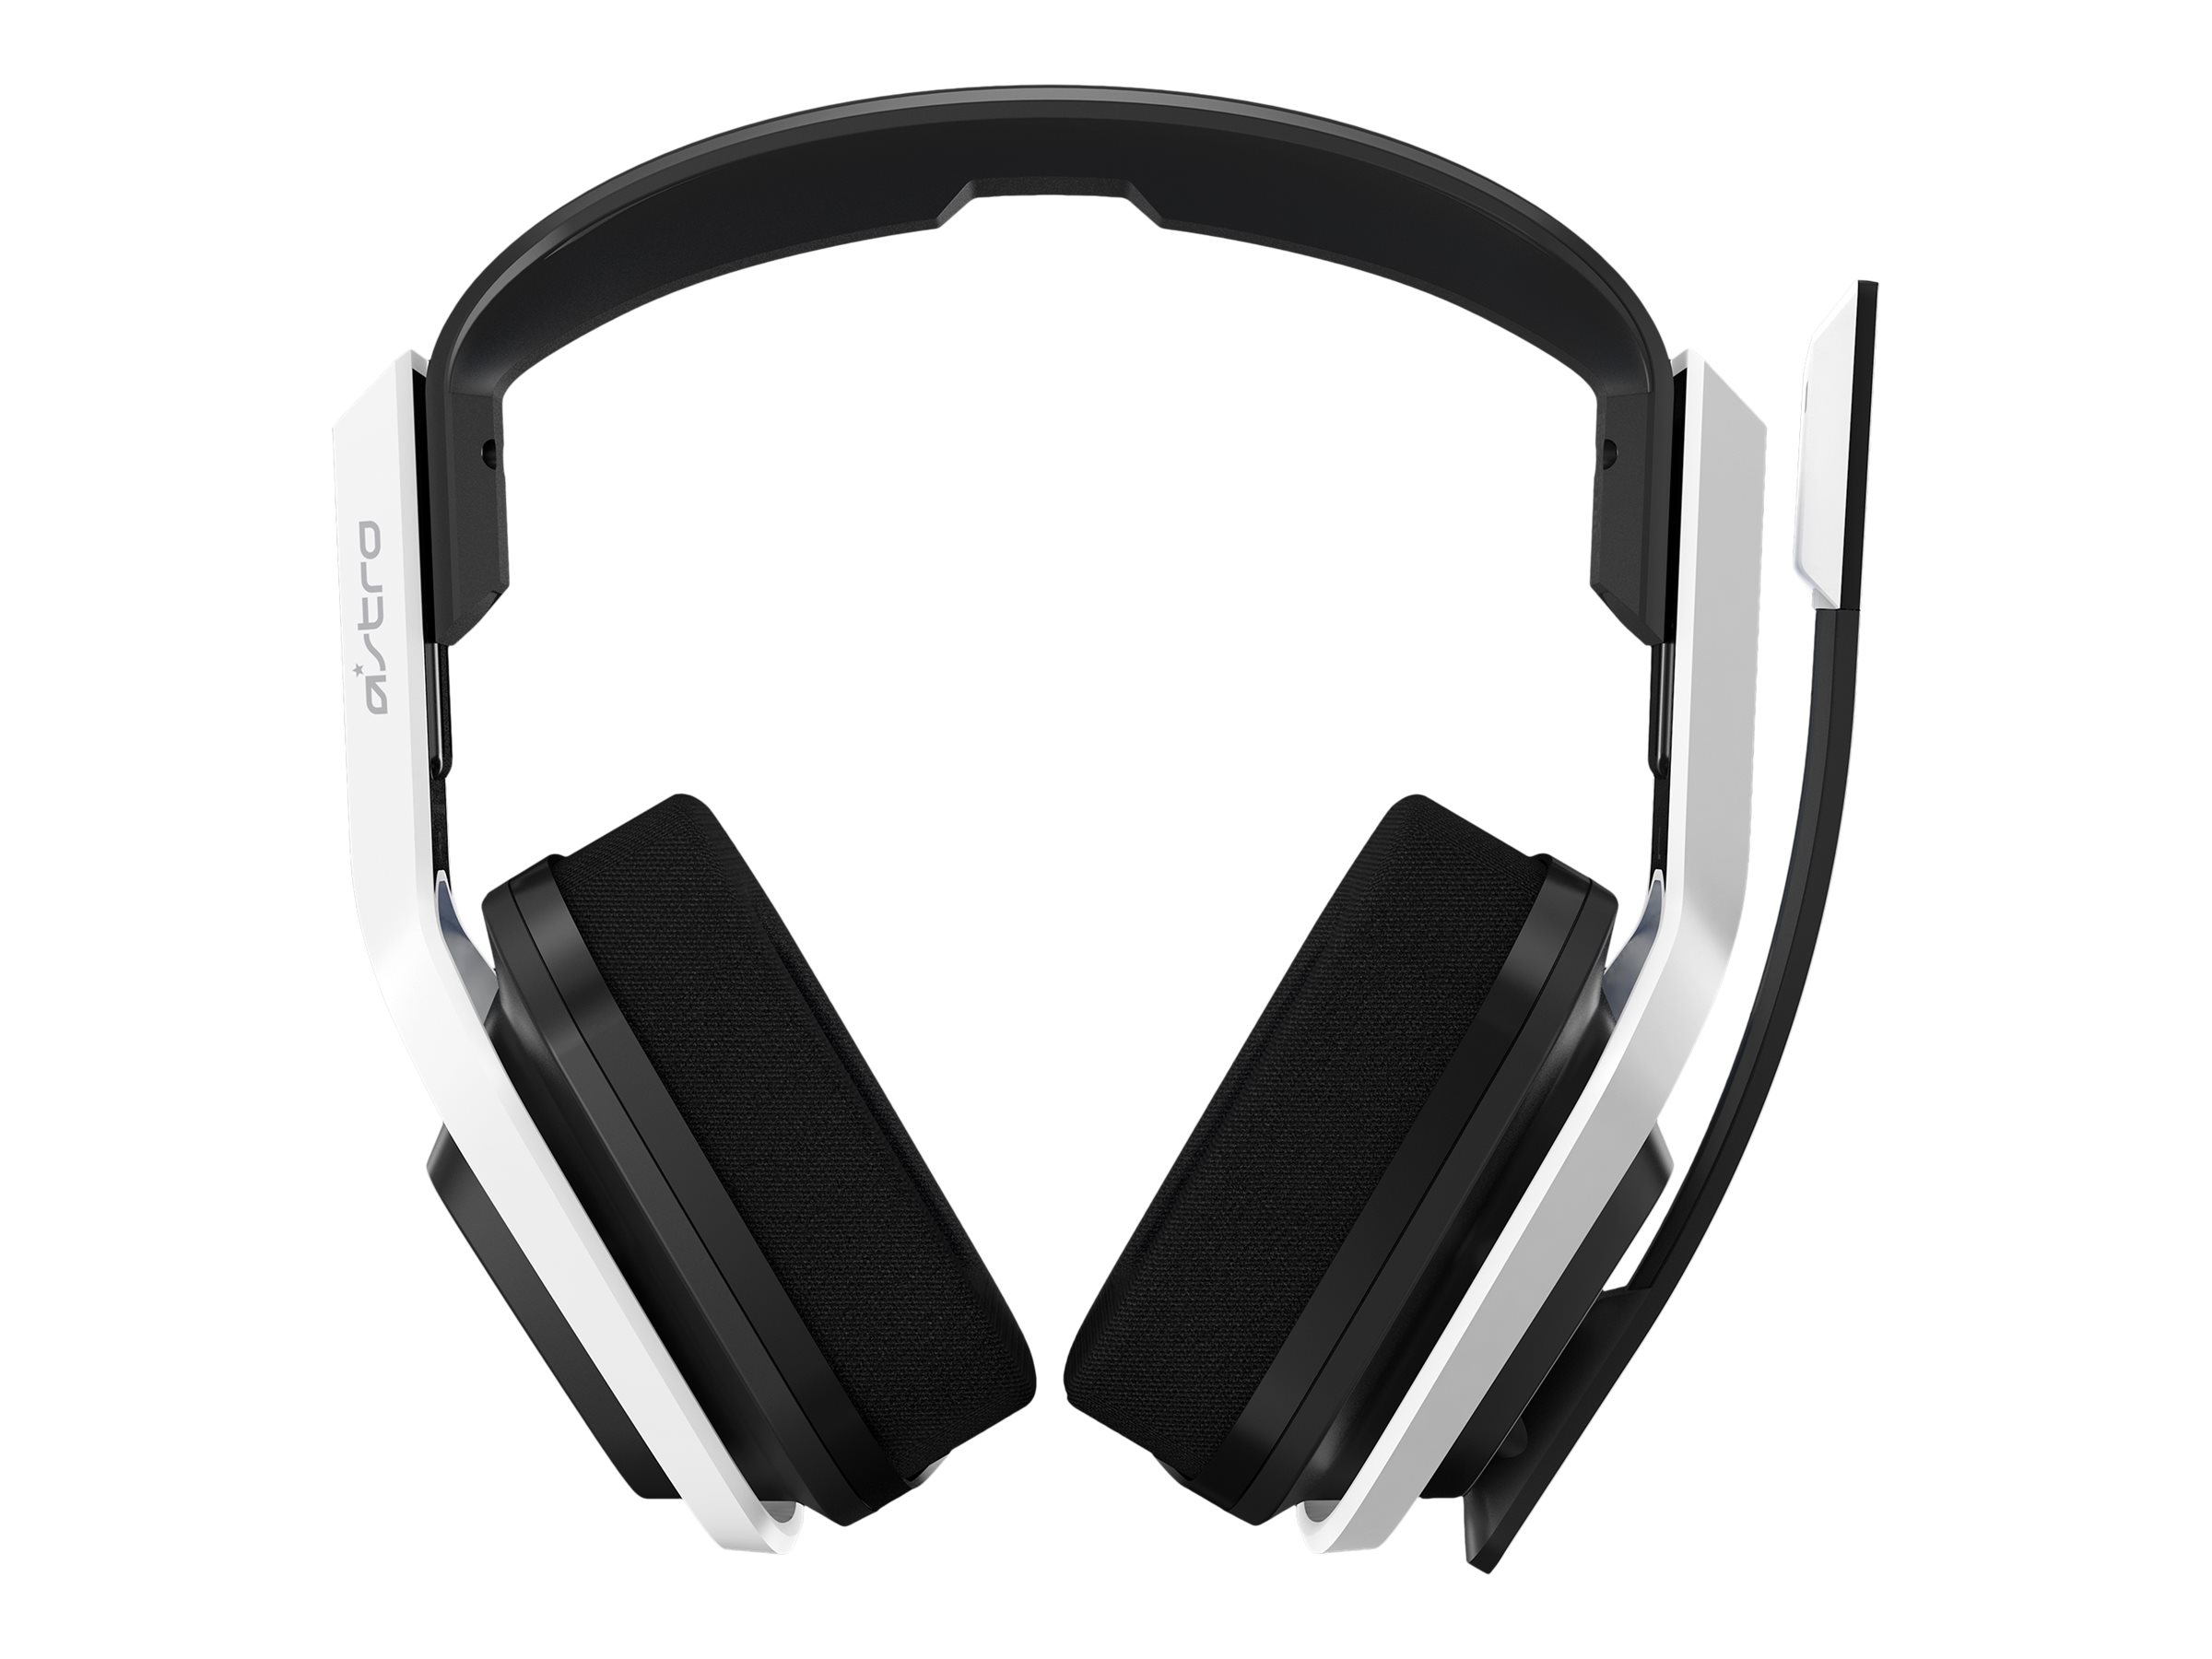 SteelSeries Arctis Gaming A20 and differences? 2: Nova comparison Wireless Gen ASTRO 7P vs